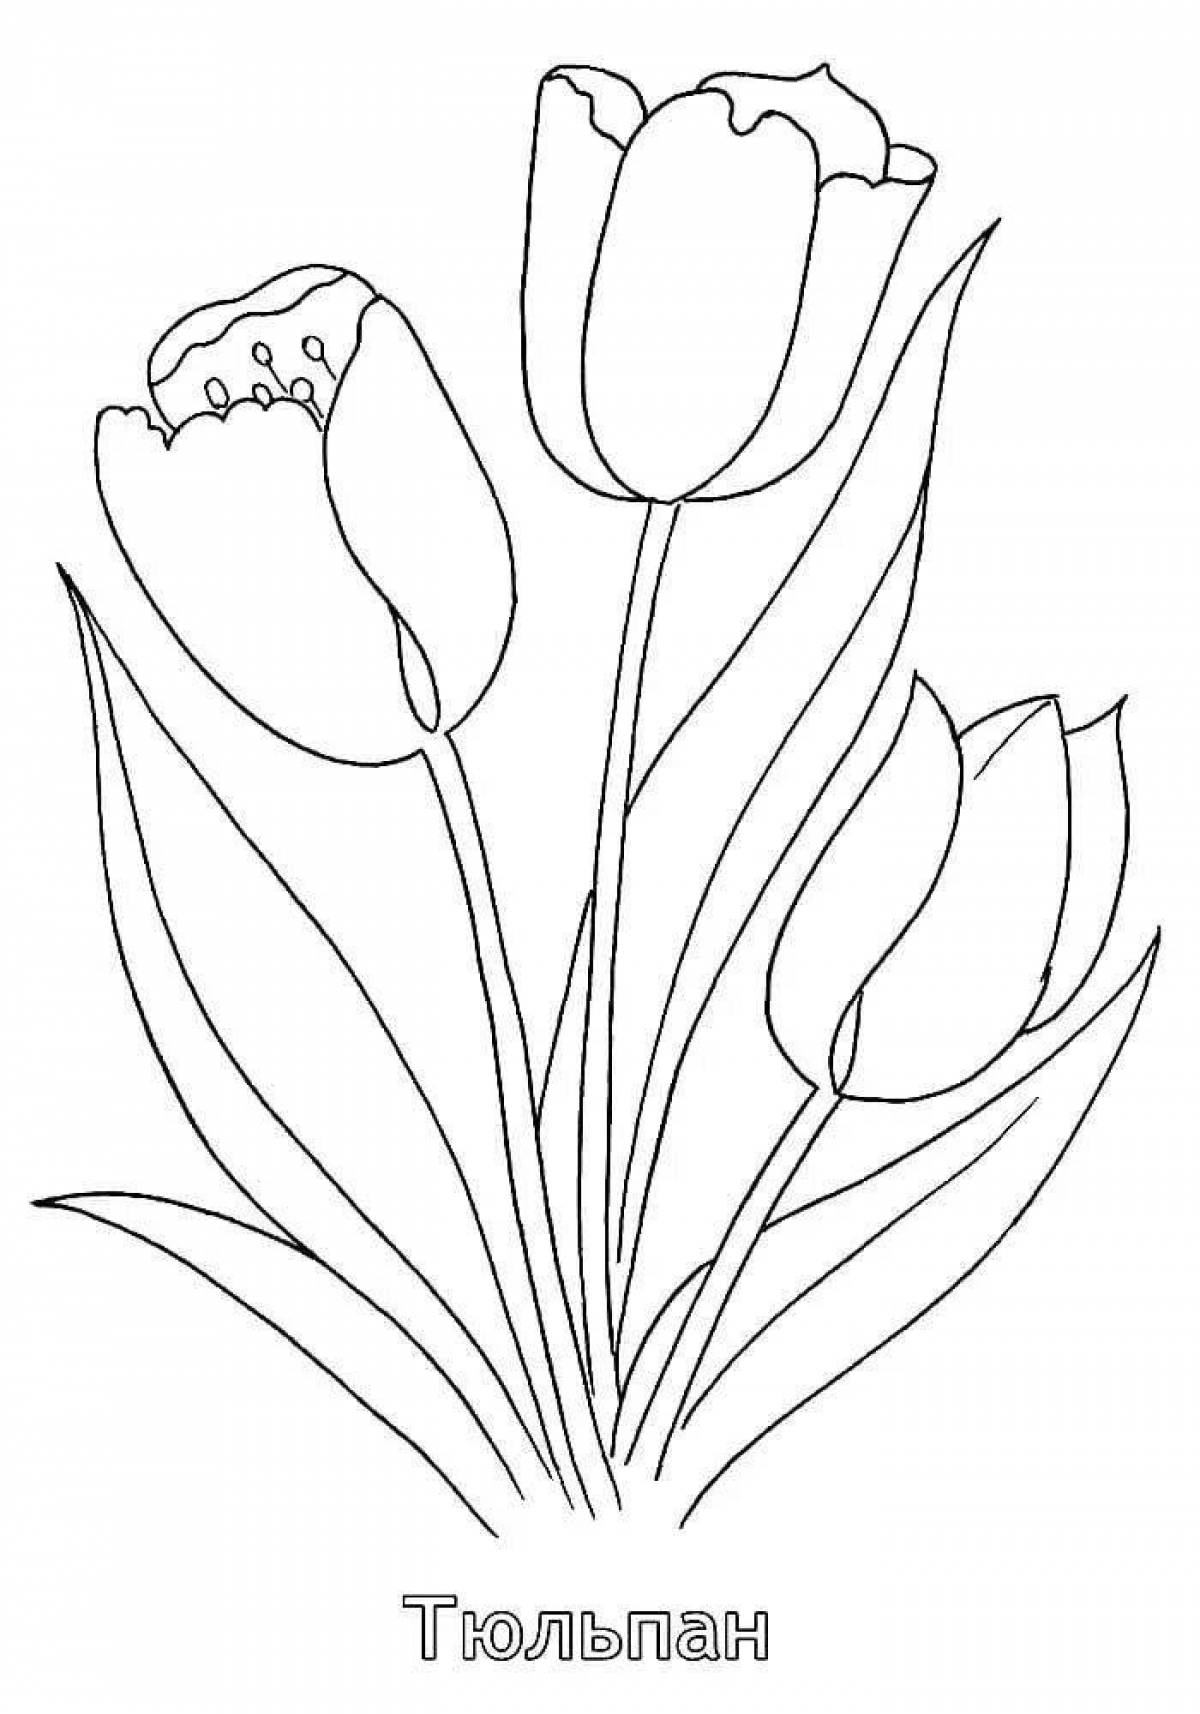 Coloring book charming tulip